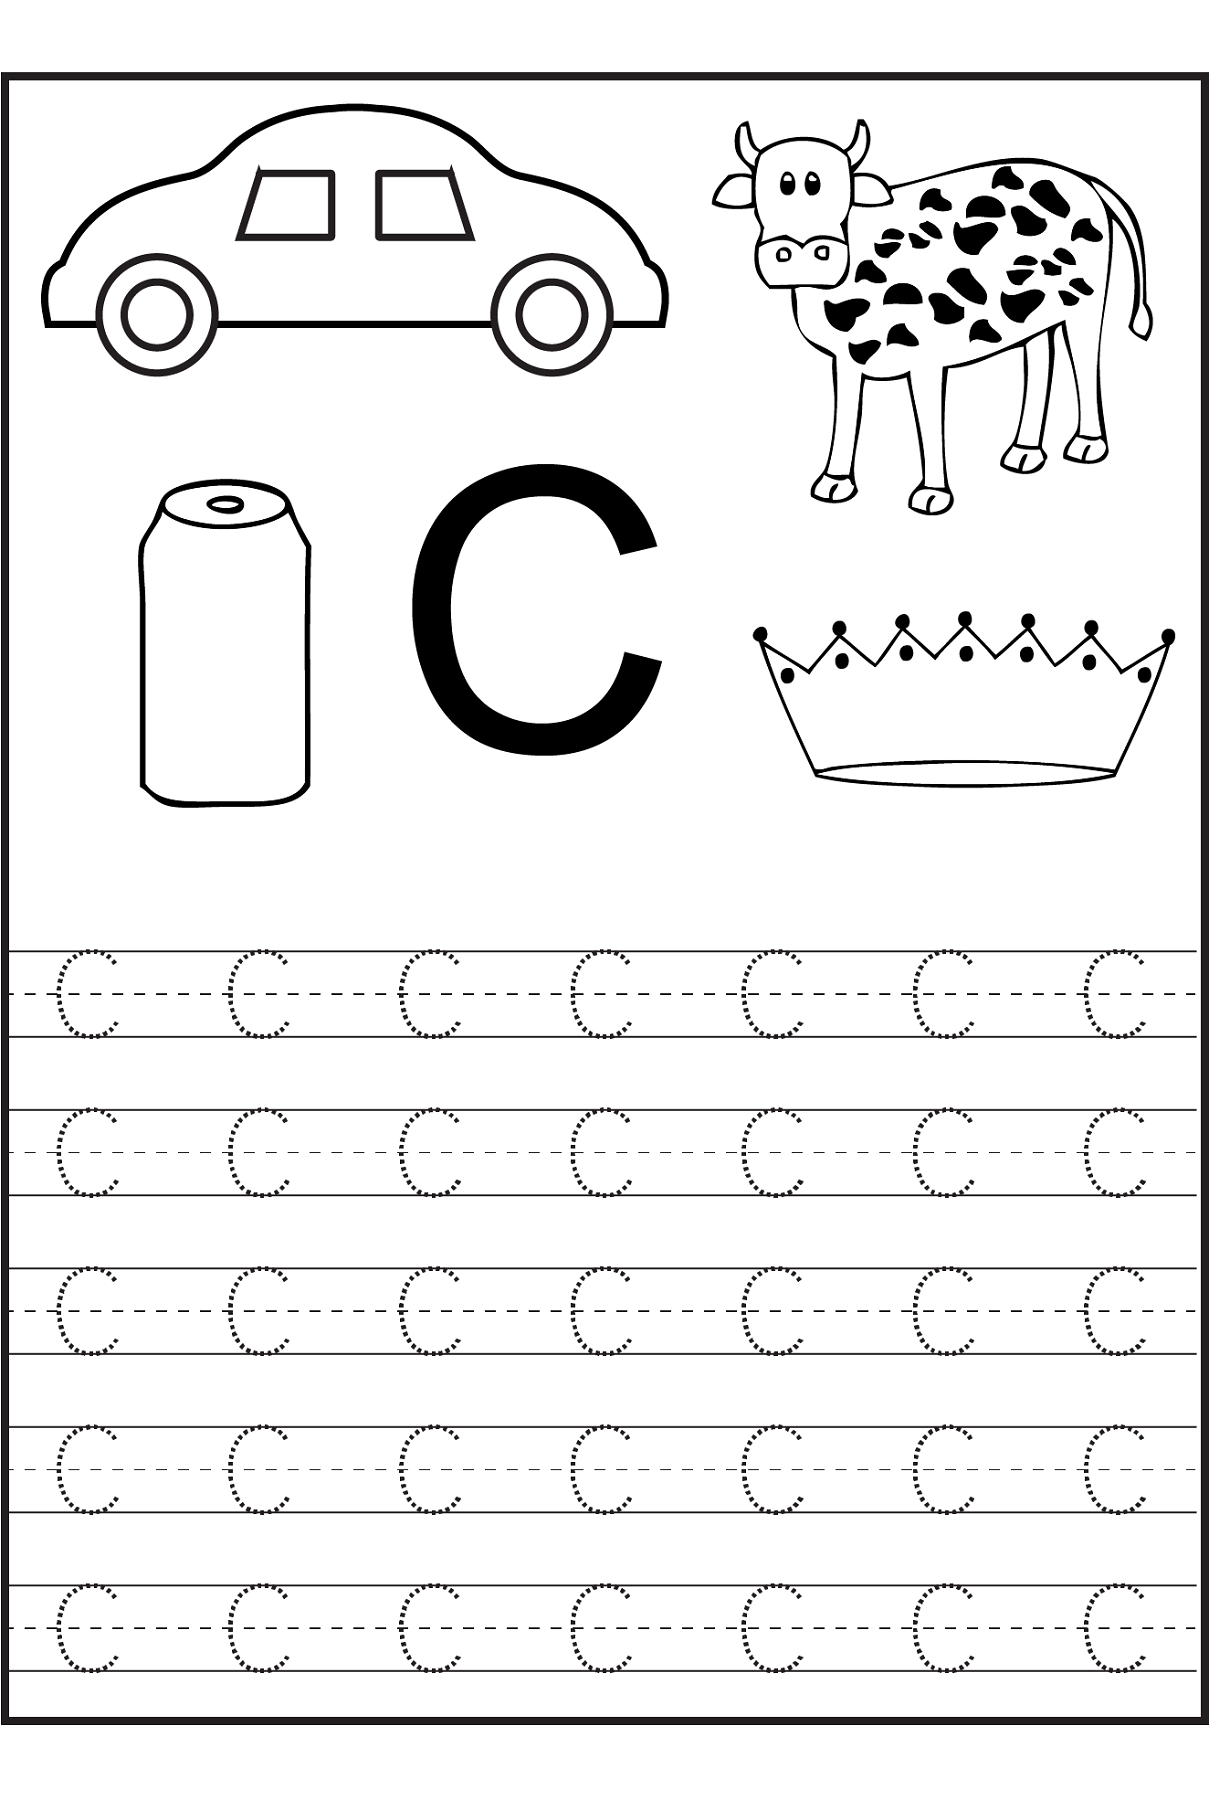 Trace The Letter C Worksheets | Free Preschool Worksheets with regard to Letter C Worksheets For Kindergarten